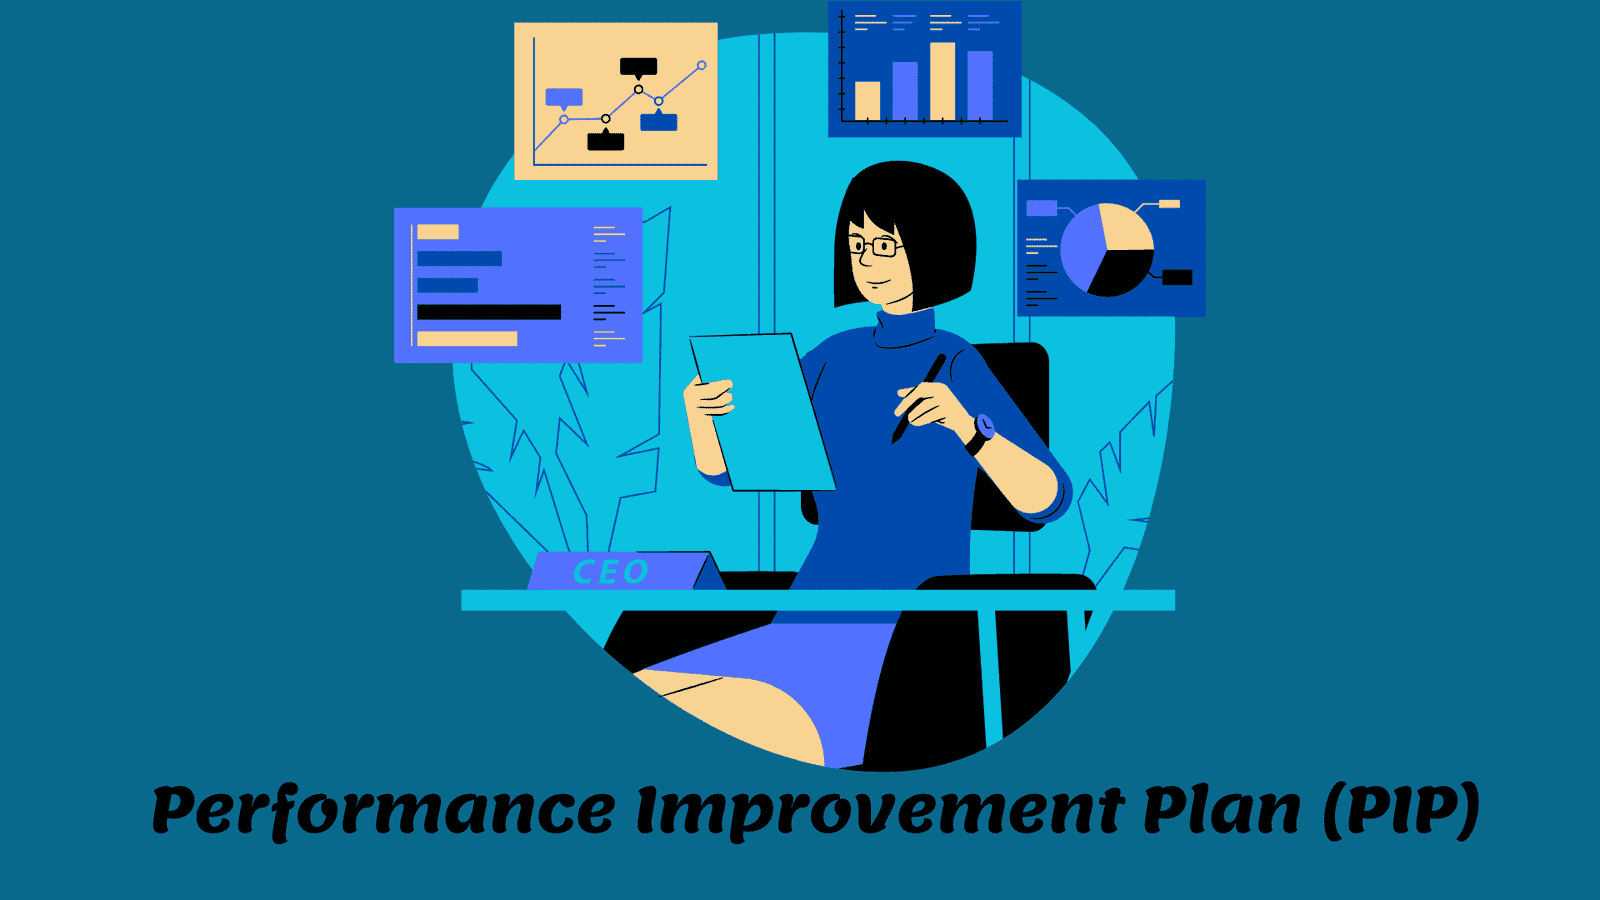 Performance Improvement Plan (PIP) features goals benefits and downsides create Image